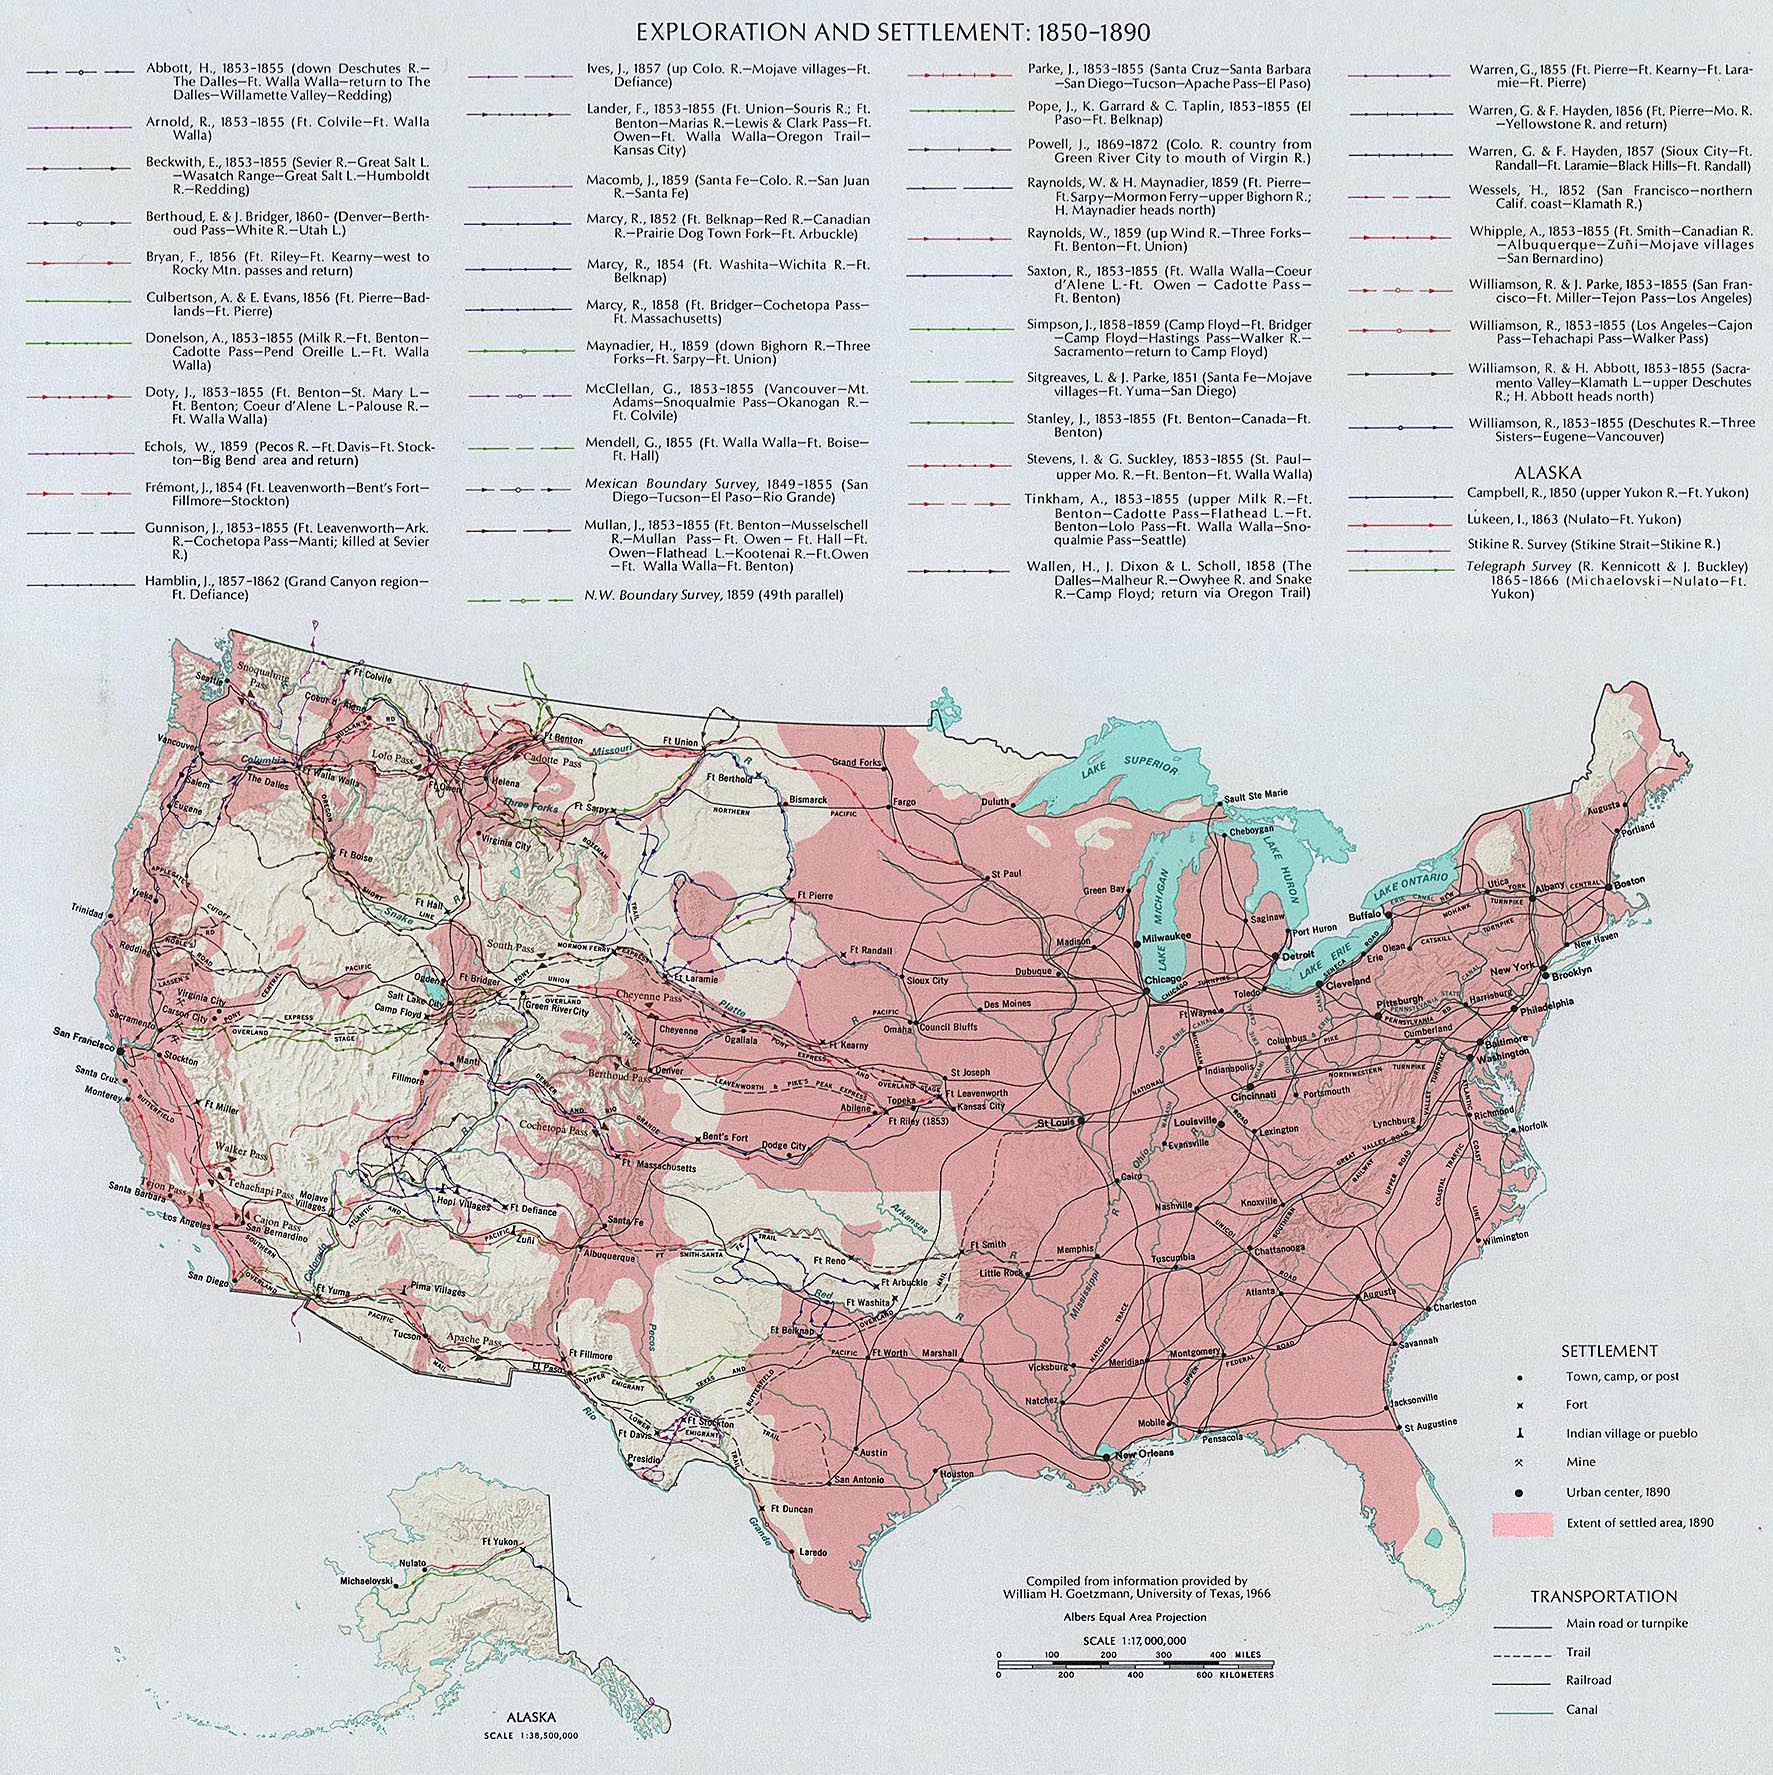 Map of the United States - Exploration and Settlement 1850-1890